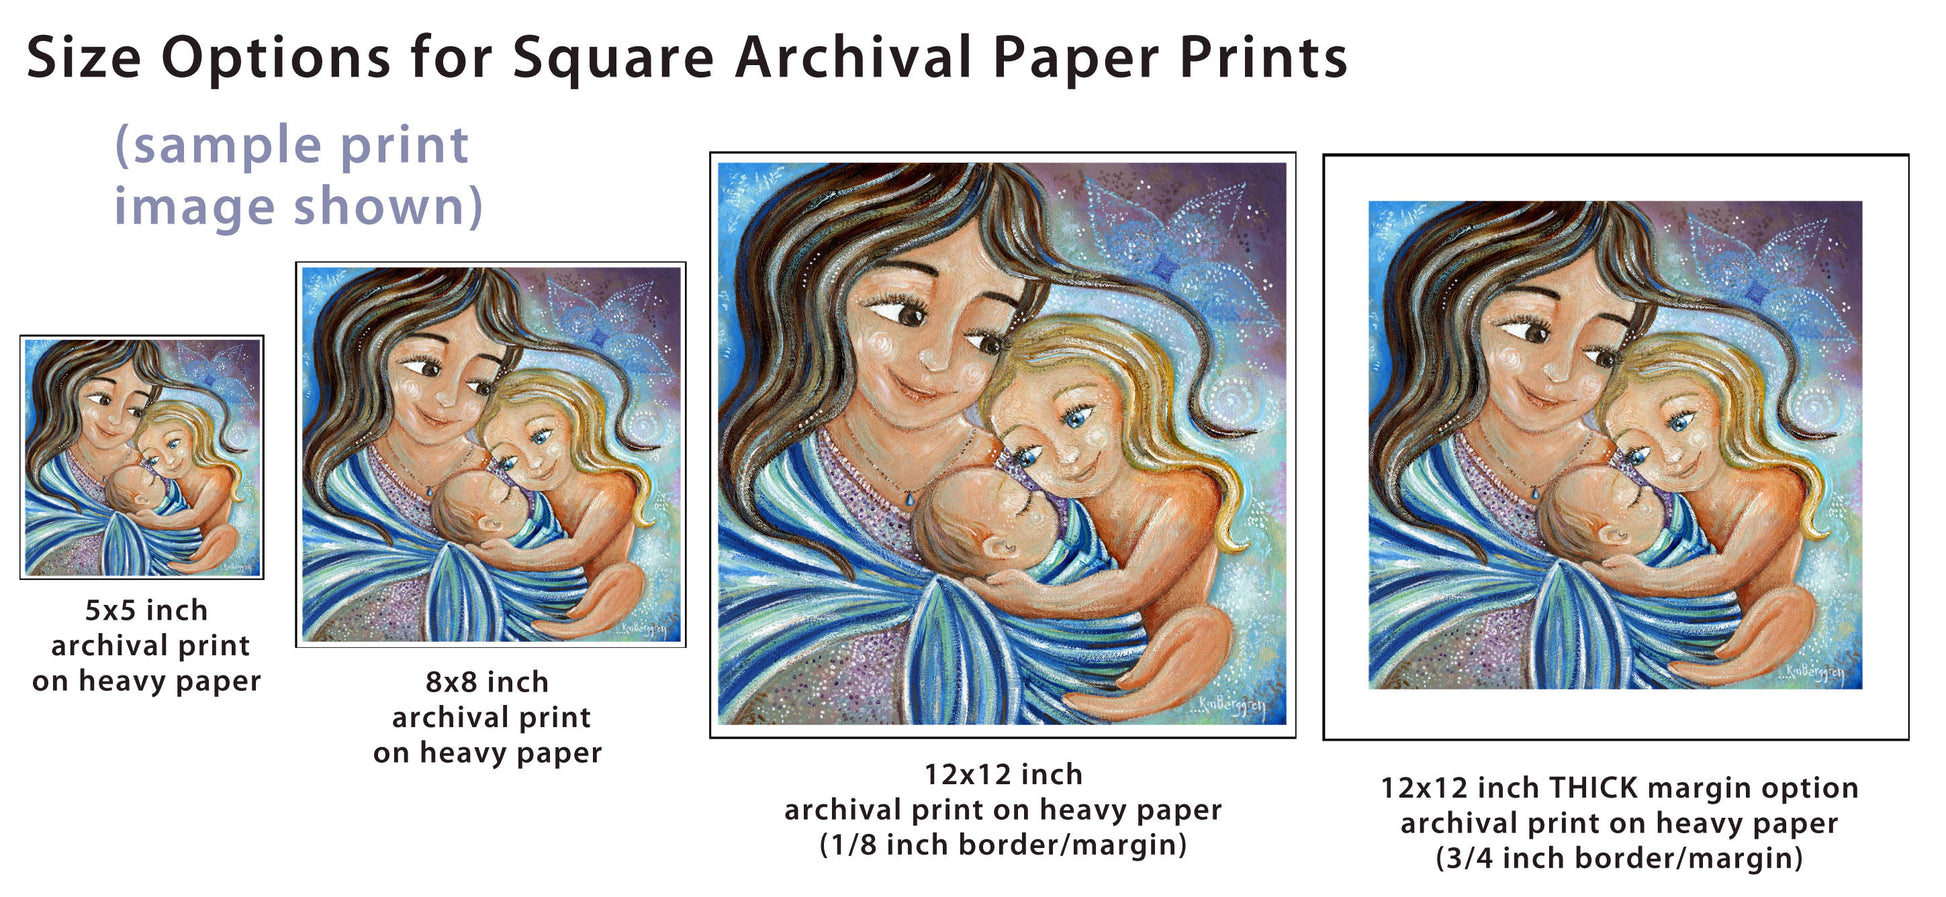 blonde mother and biracial child artwork on canvas or paper